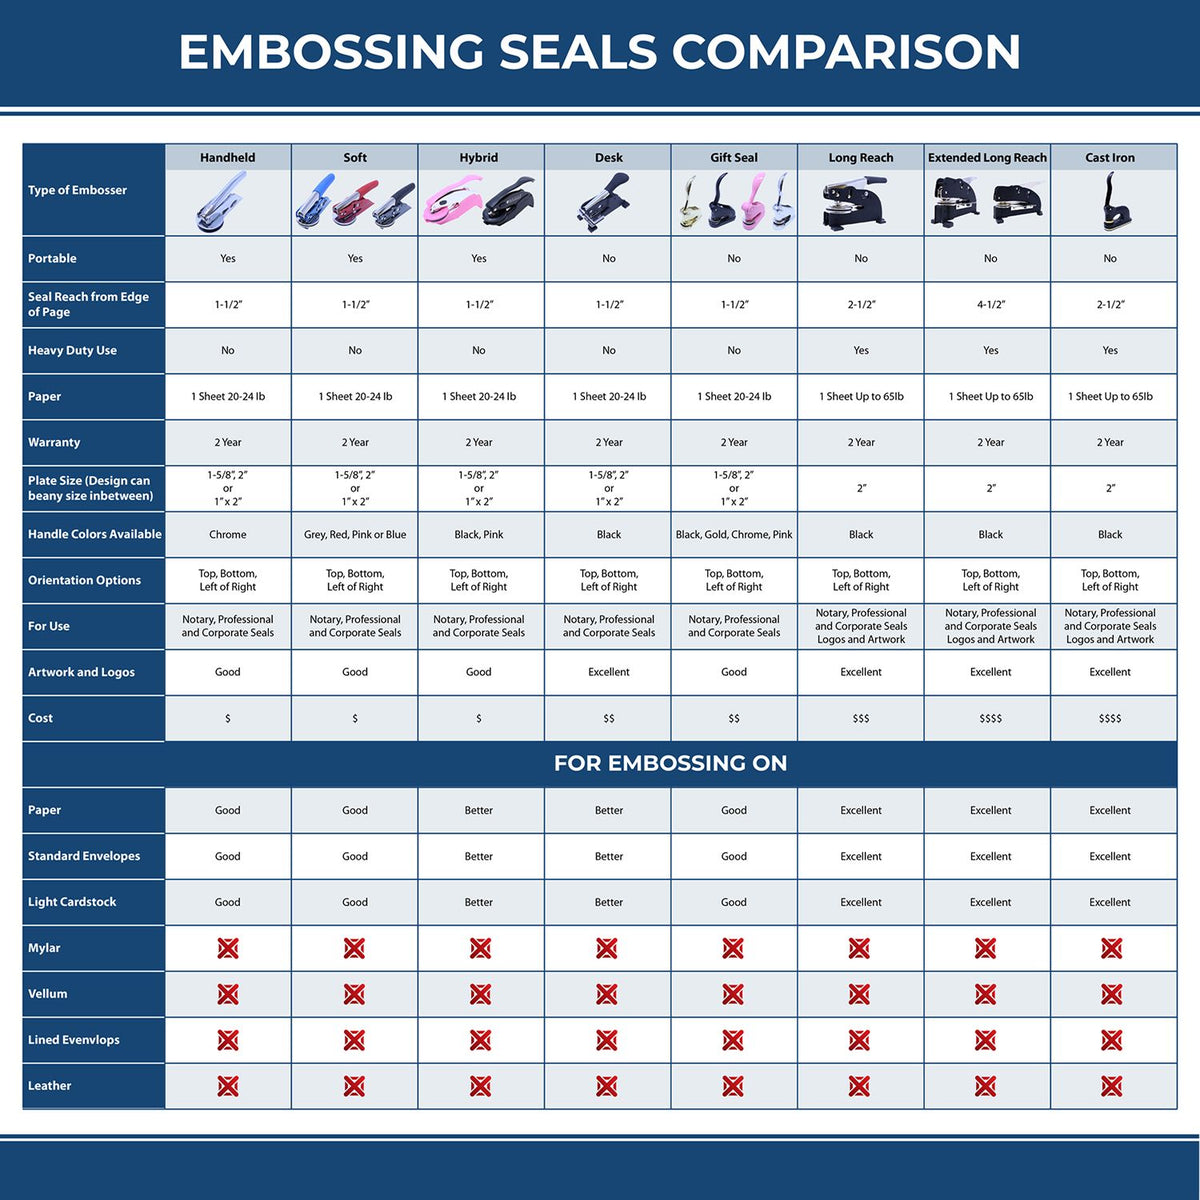 A comparison chart for the different types of mount models available for the Handheld Nevada Professional Geologist Embosser